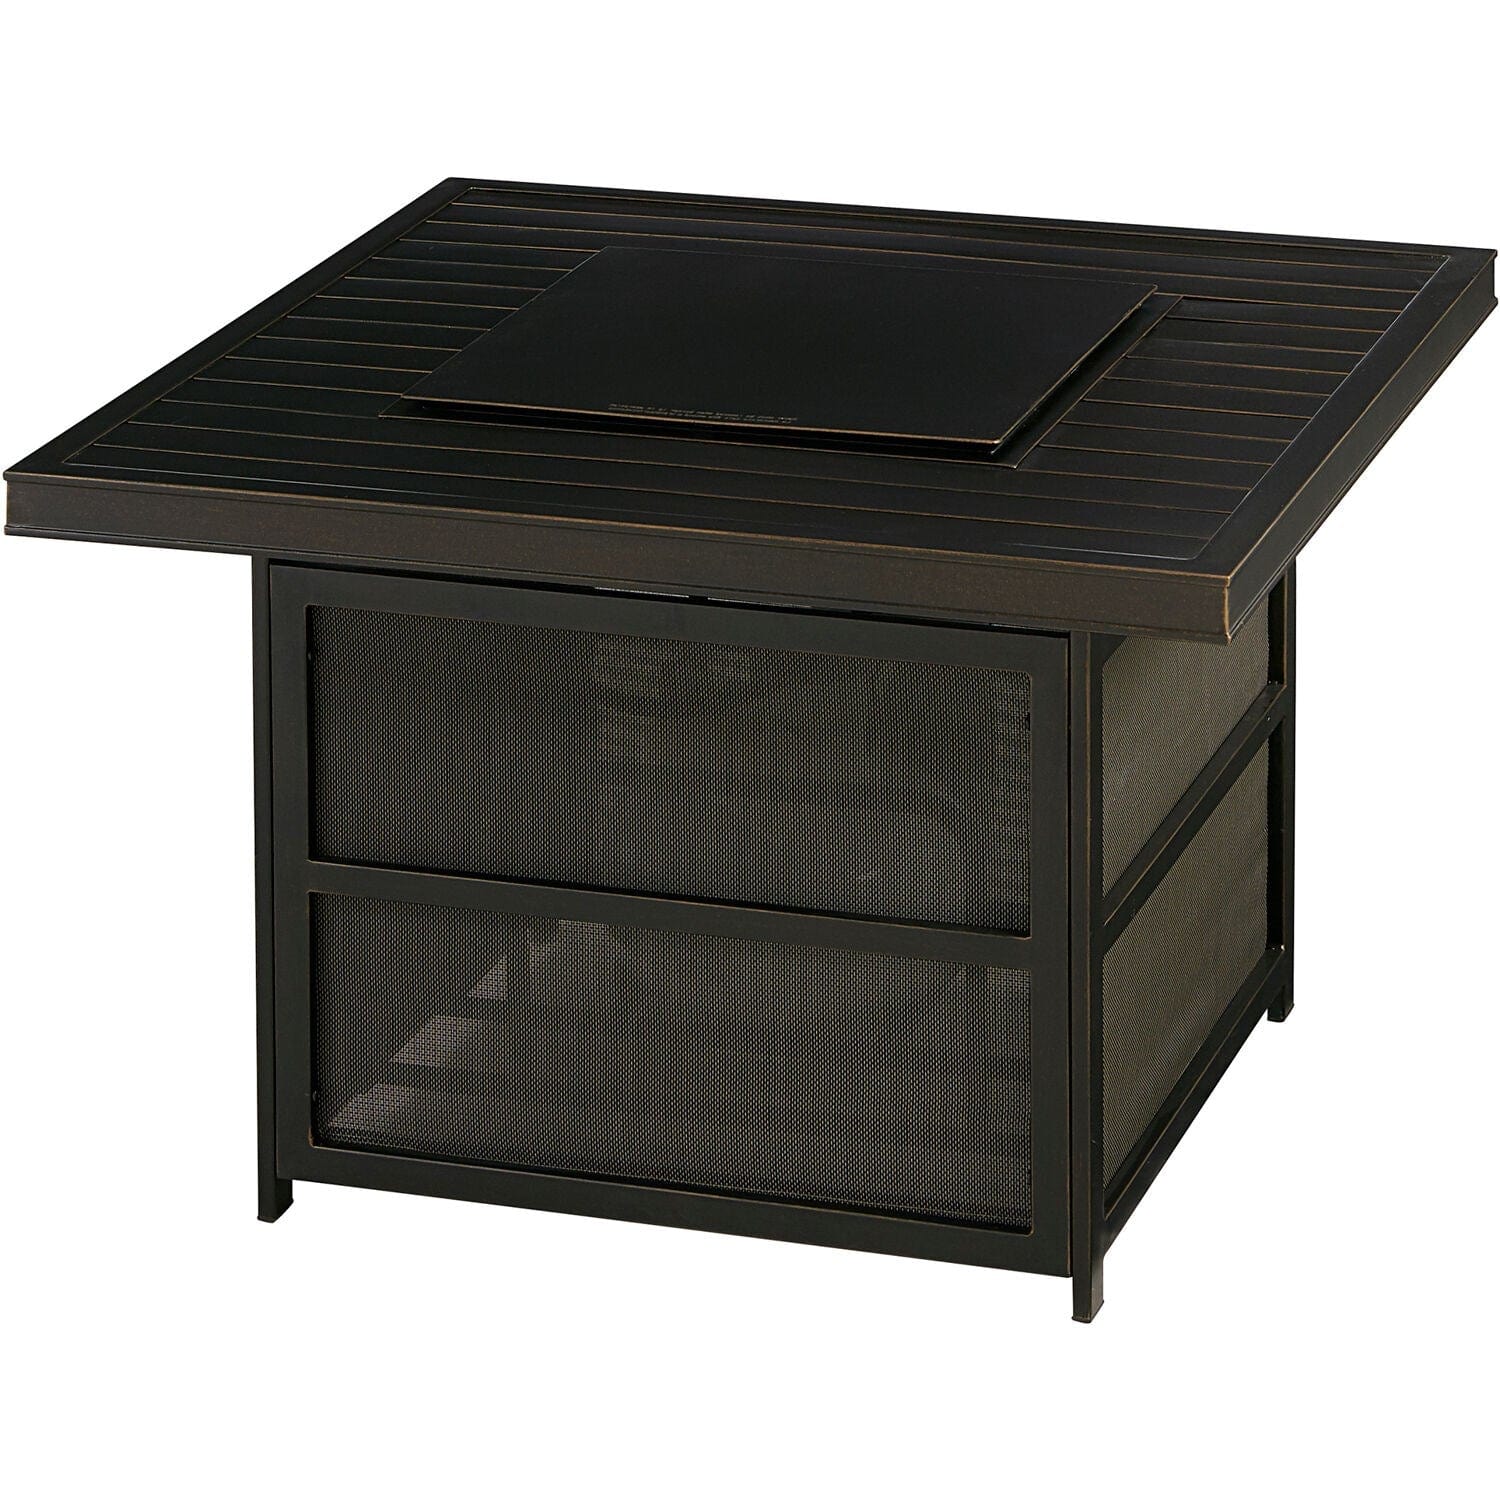 Hanover Fire Table Hanover - Traditions 38" Square Slat Top Fire Pit | TRAD38SQFP